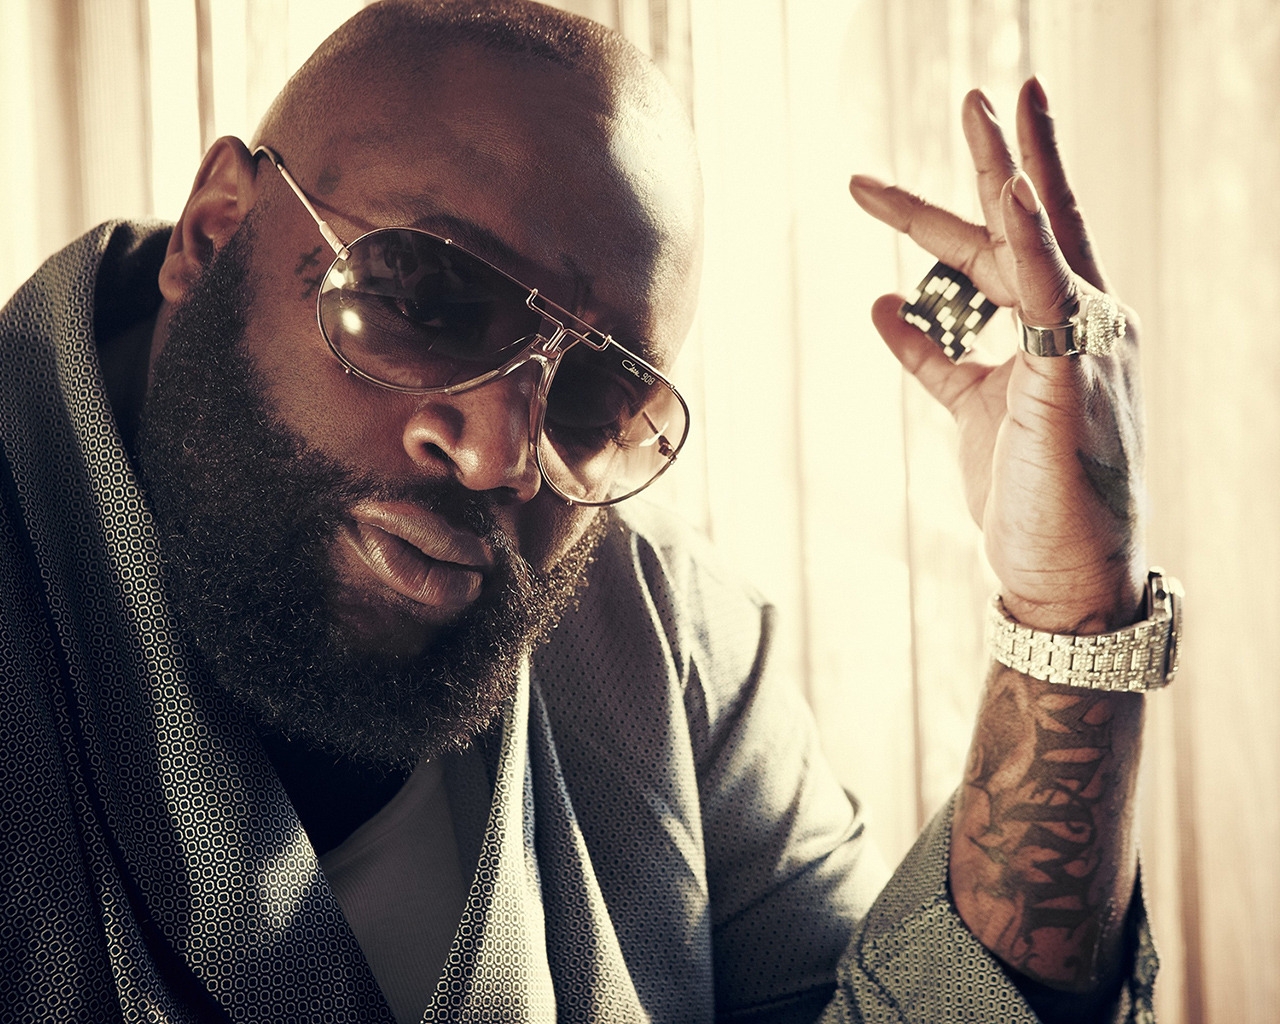 Rick Ross for 1280 x 1024 resolution